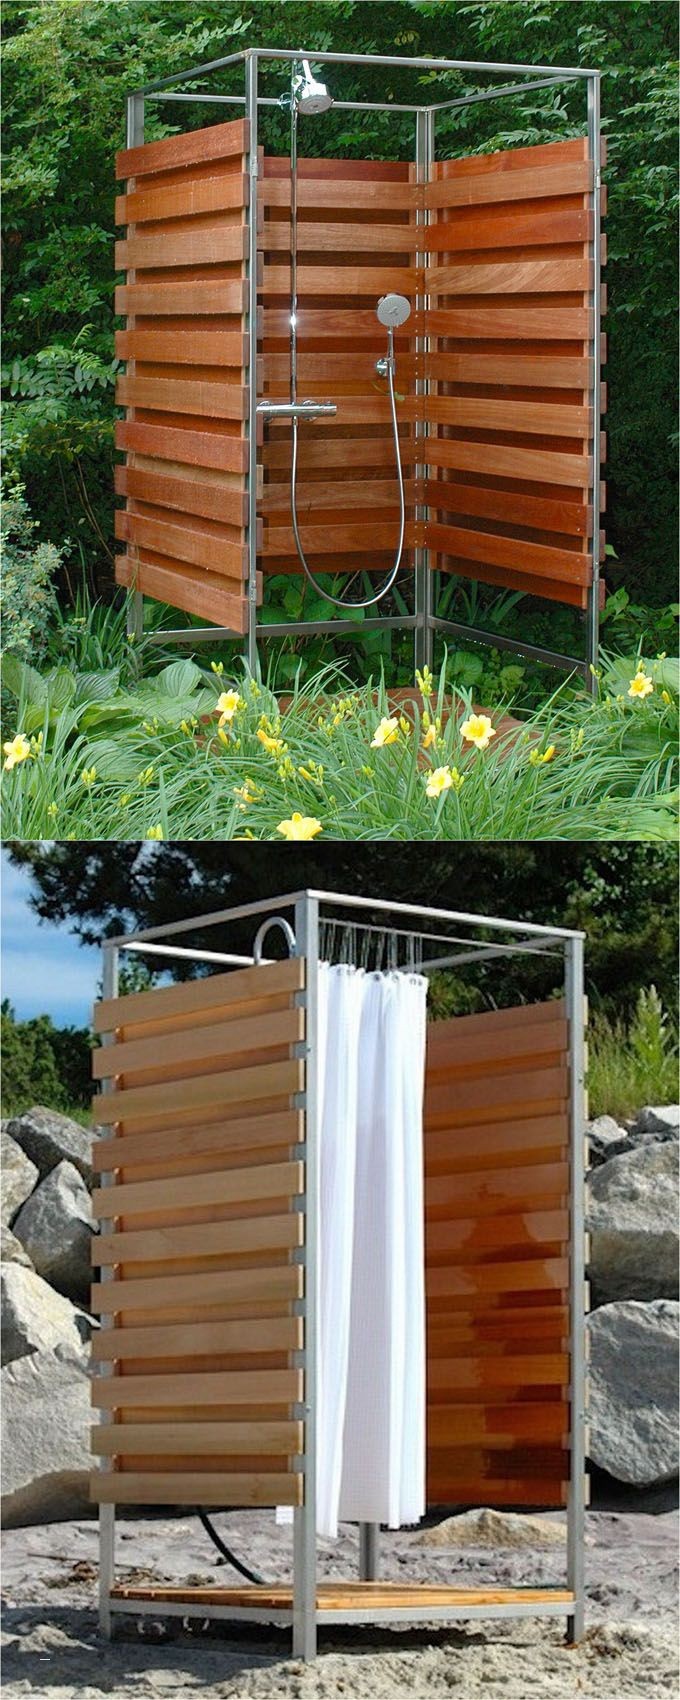 Corrugated Metal Outdoor Shower Awesome Nice Outdoor Shower Enclosure Ideas Bomelconsult